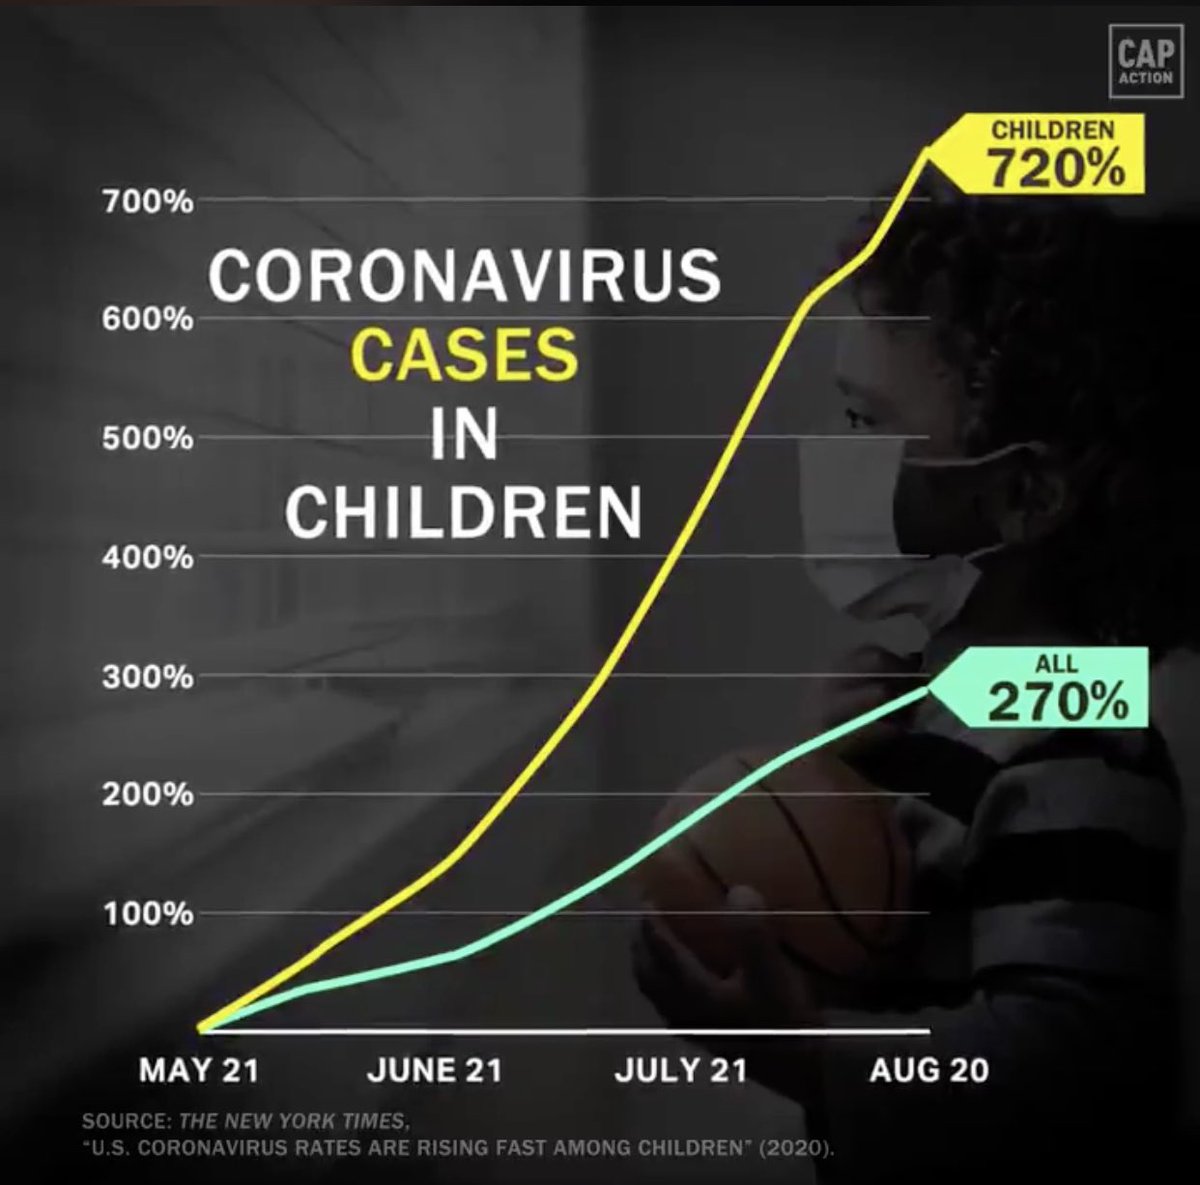 2) Here is the stat of 700% increase for cases in kids from video above.